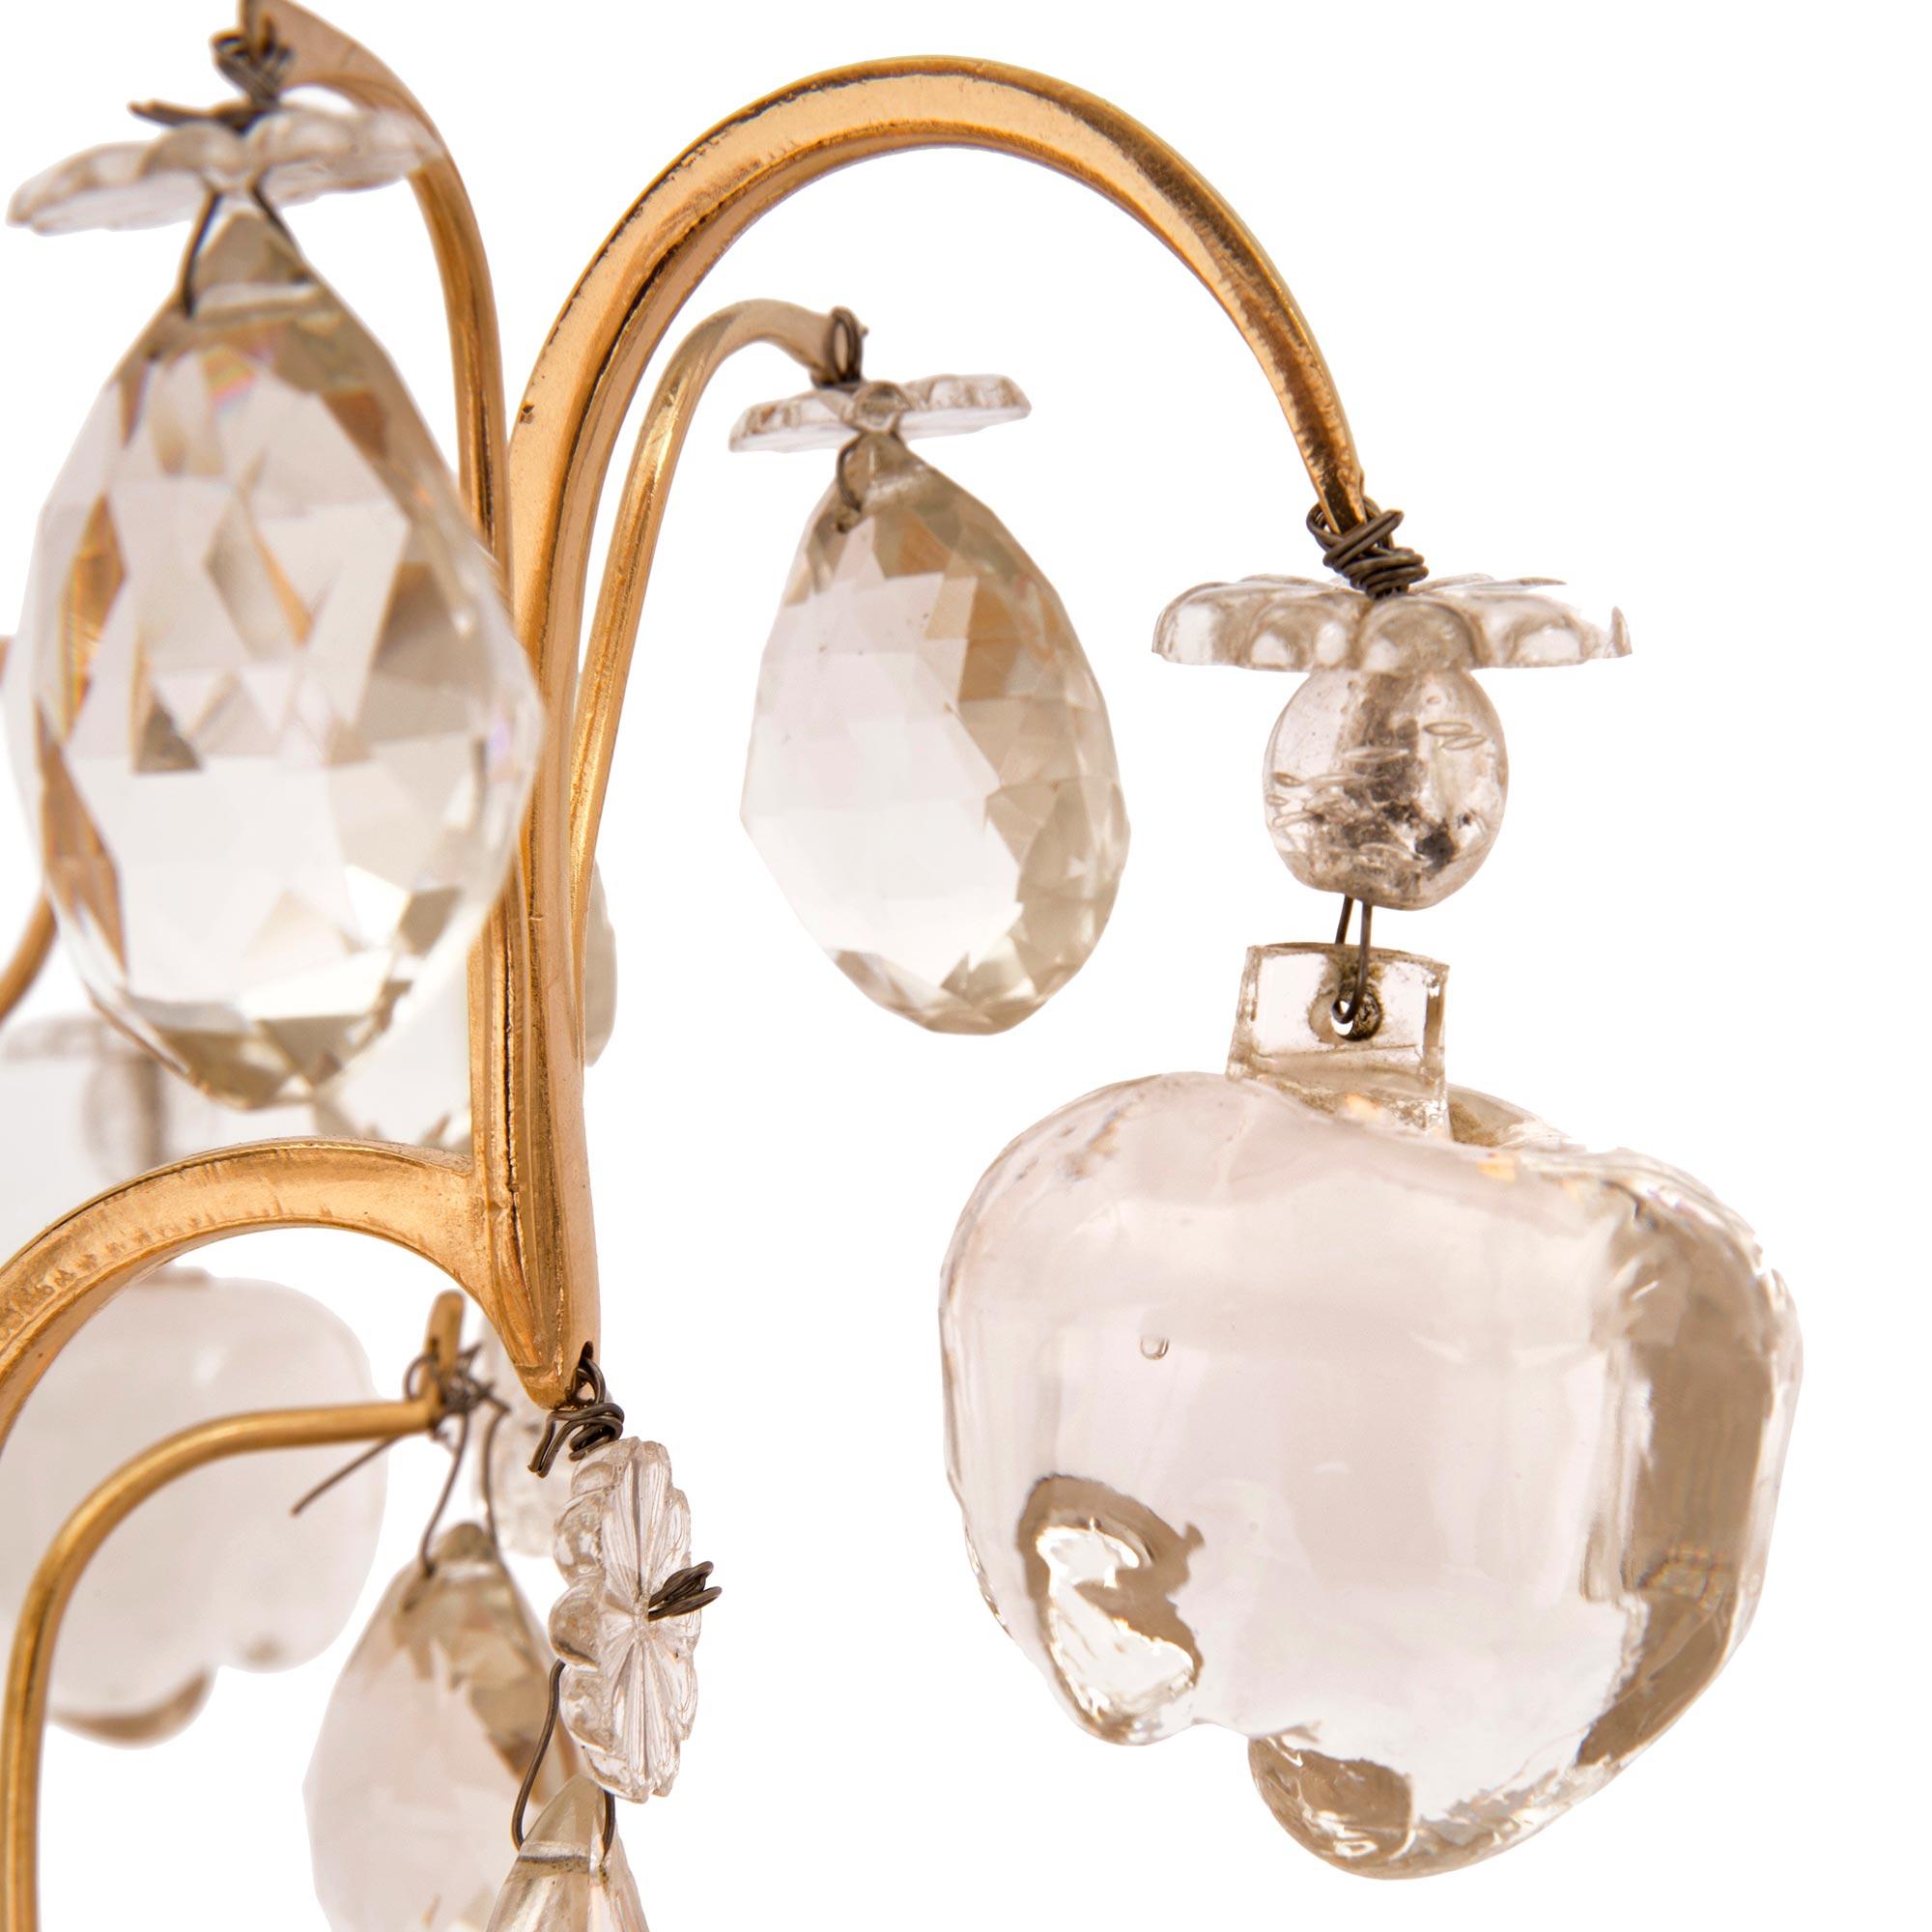 Crystal Pair of French 19th Century Louis XVI St. Belle Époque Period Girandole Lamps For Sale